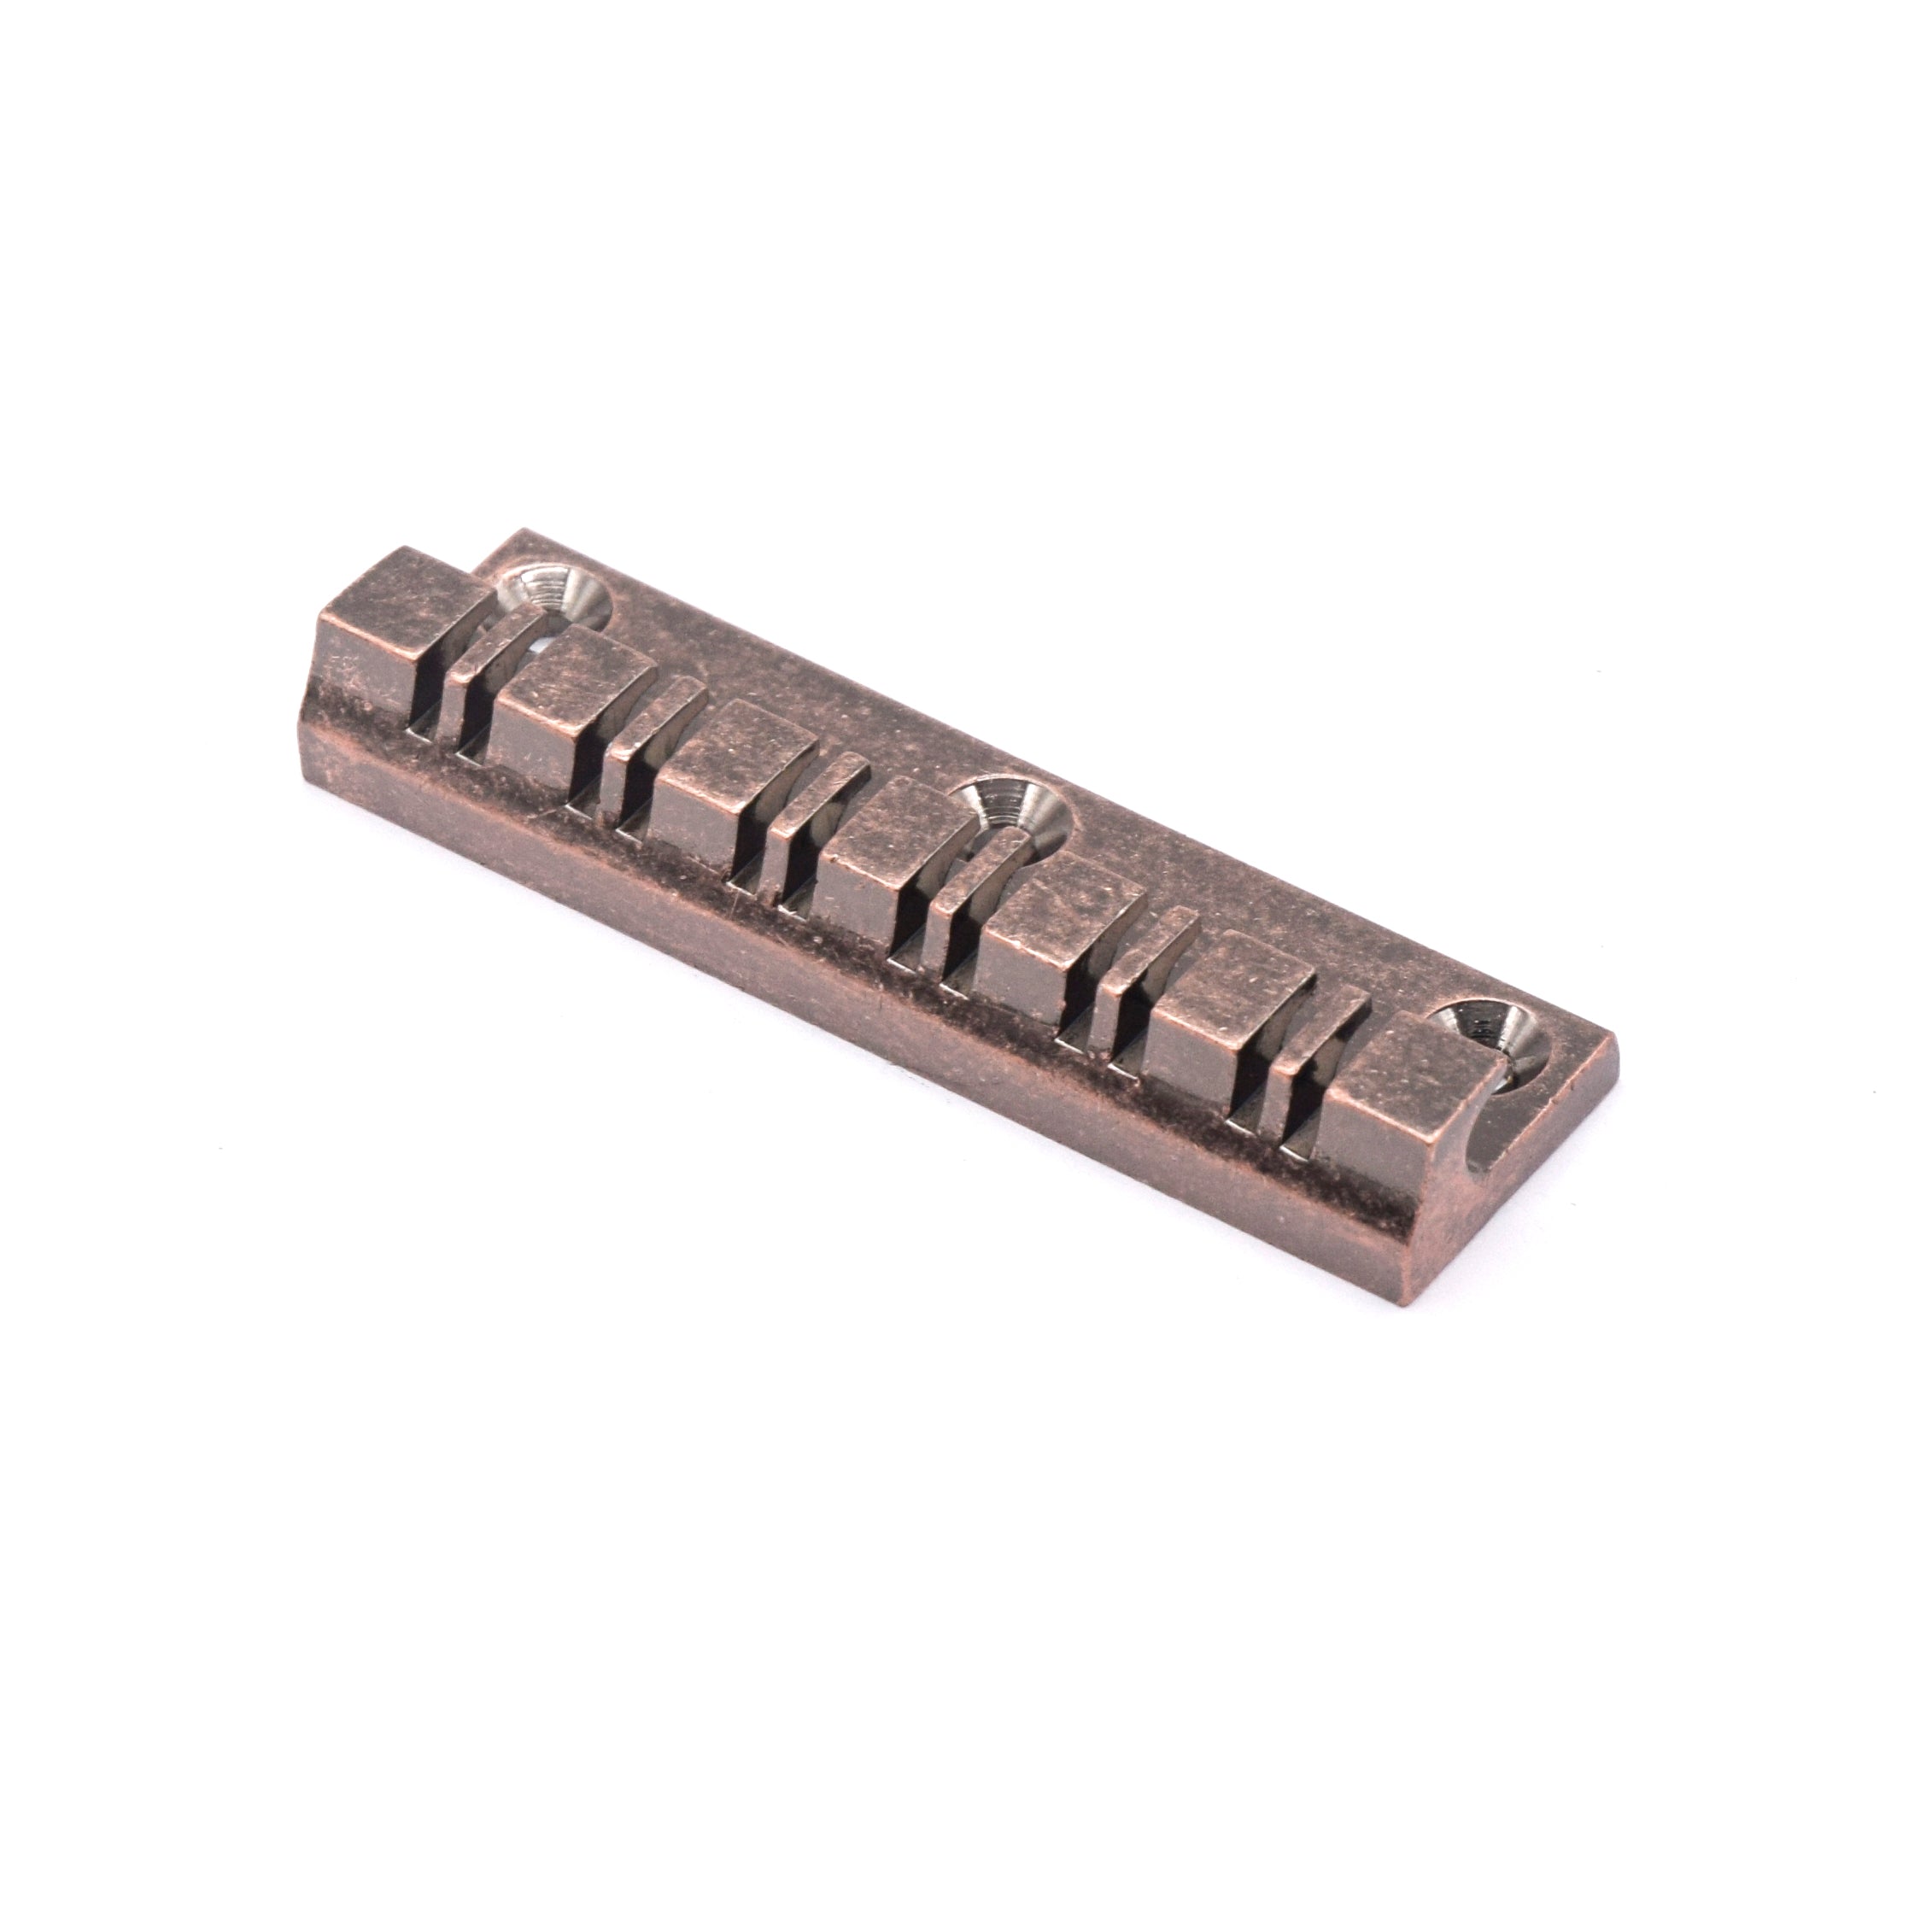 KD By AxLabs 12-String Tailpiece -3-Screw Top Mount (1275 Doubleneck Style) - AxLabs